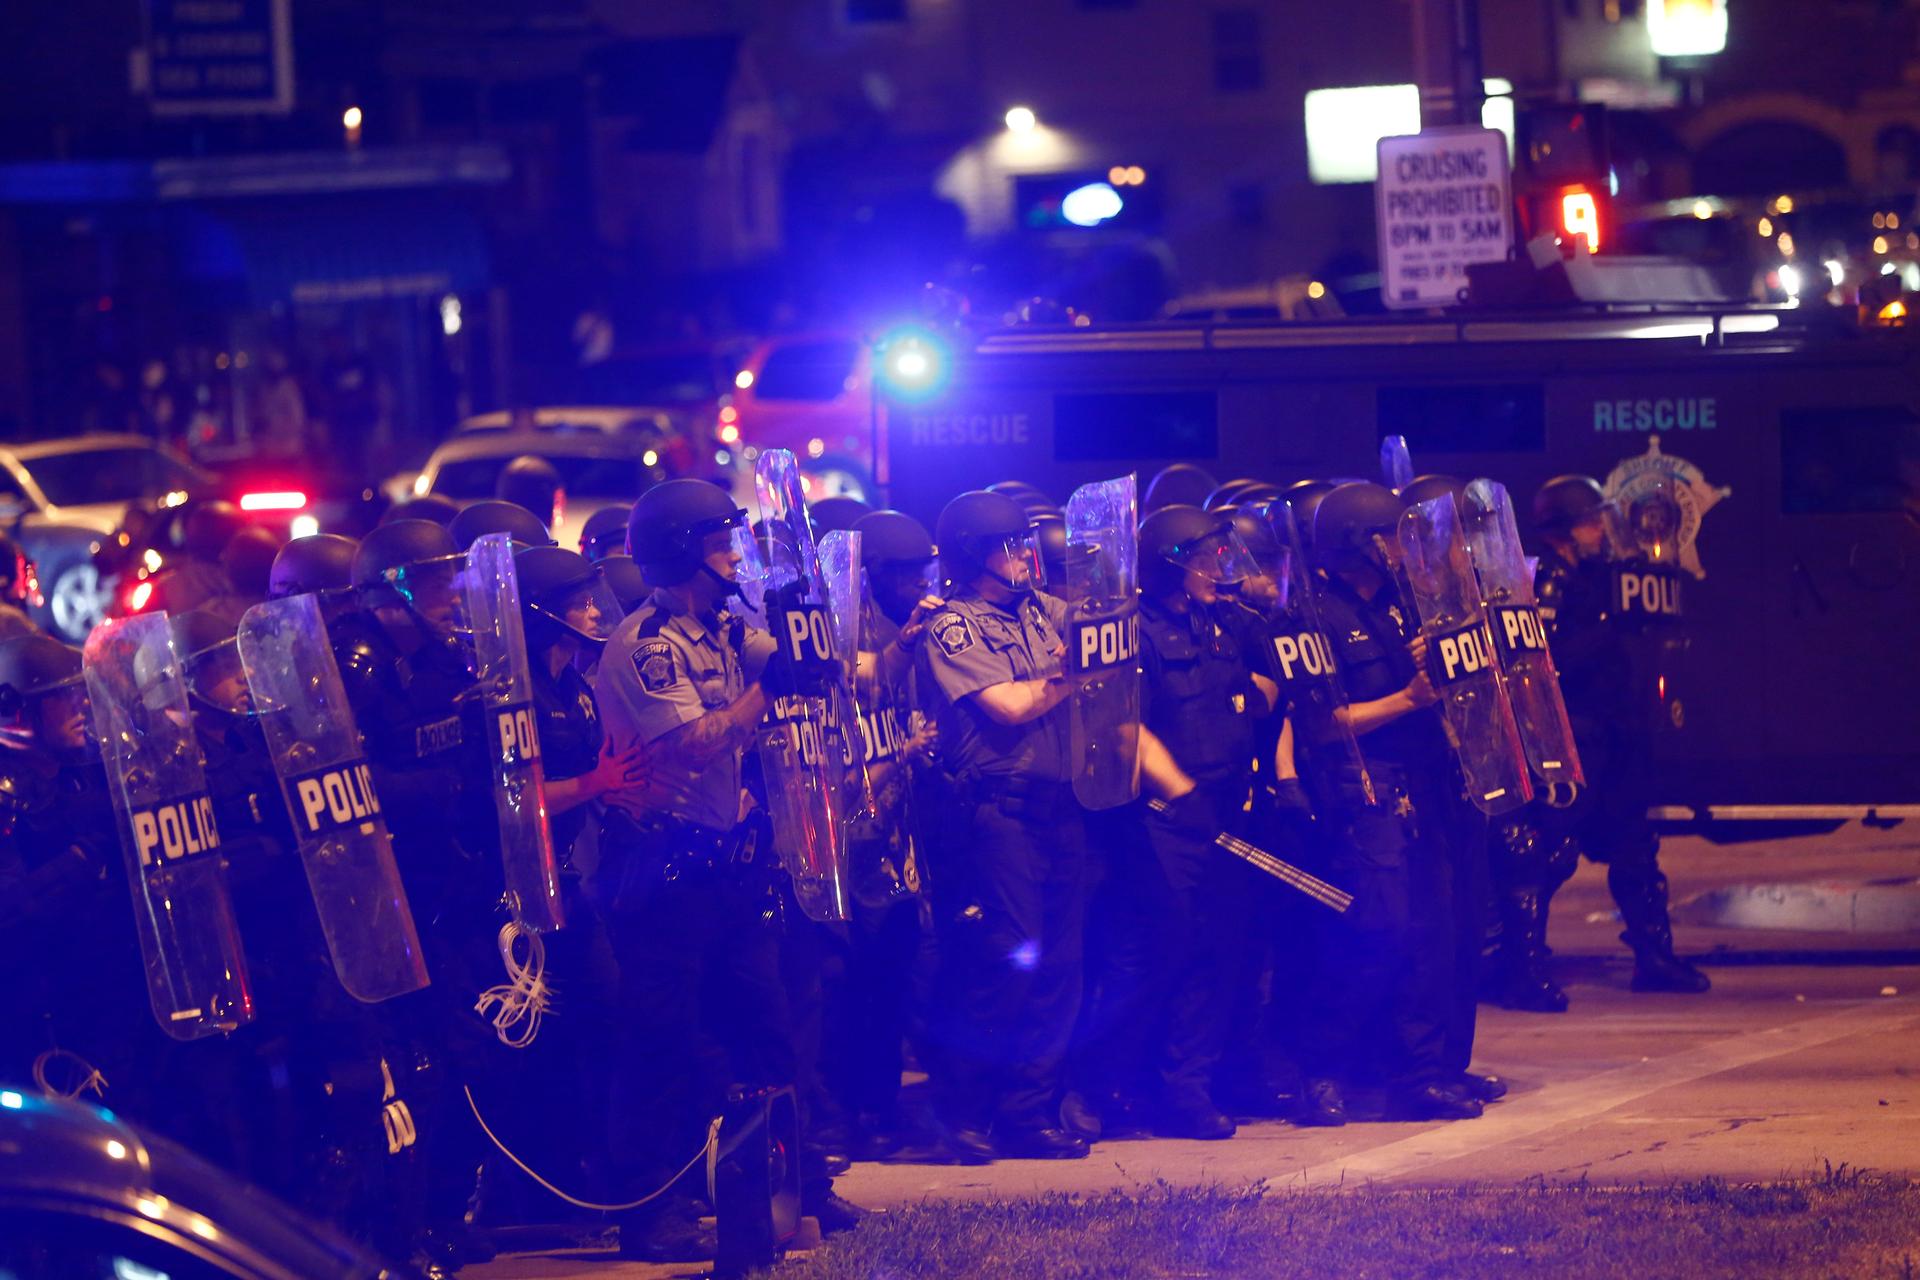 Police advance toward protesters during disturbances following the police shooting of a man in Milwaukee, Wisconsin, U.S. August 14, 2016. REUTERS/Aaron P. Bernstein 